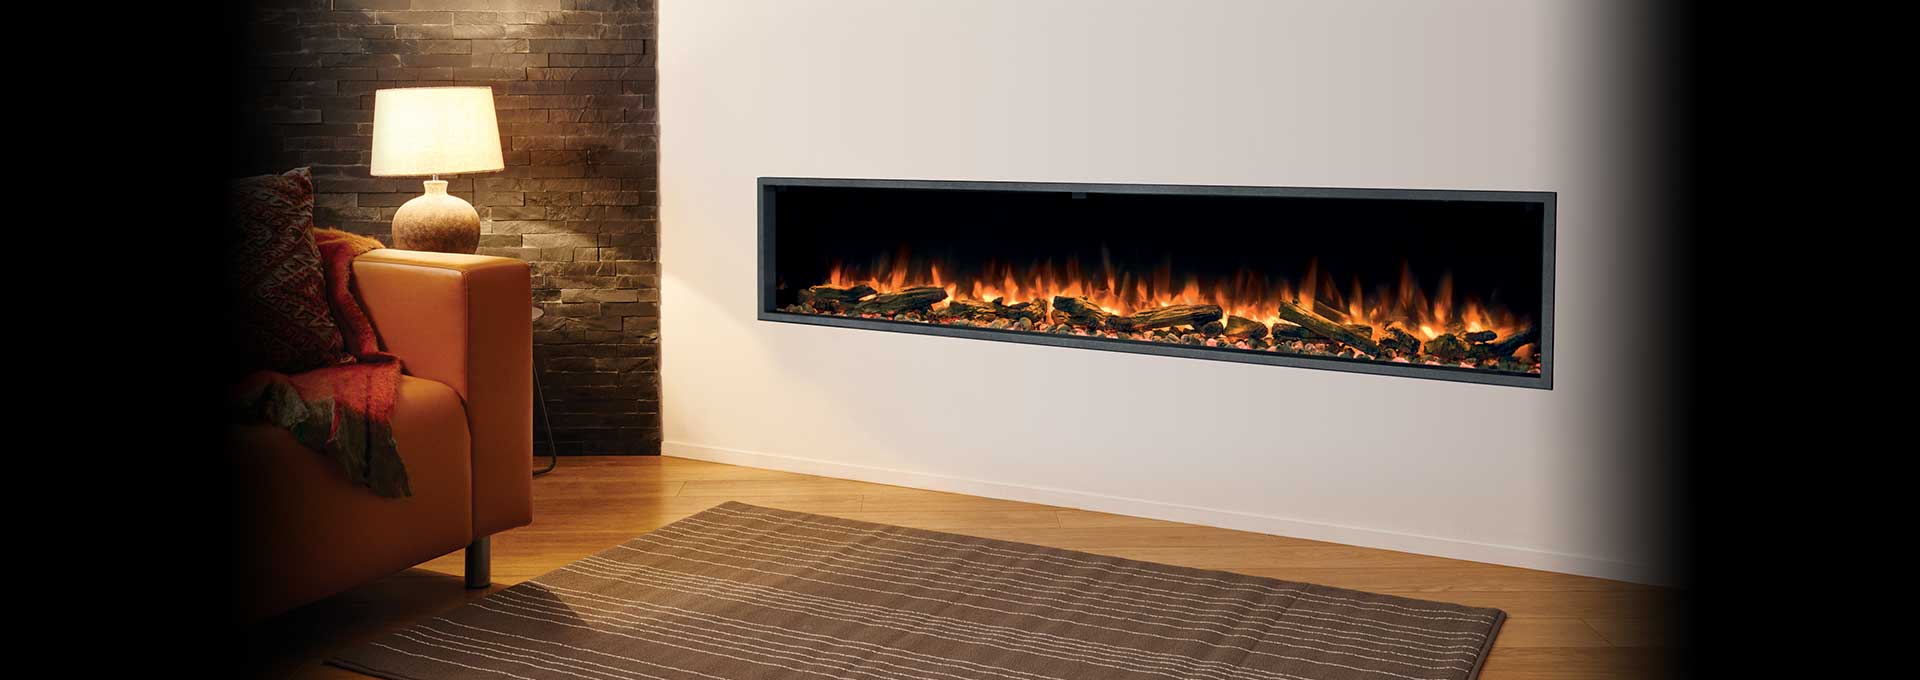 Top 5 Reasons to Buy an Electric Fireplace 